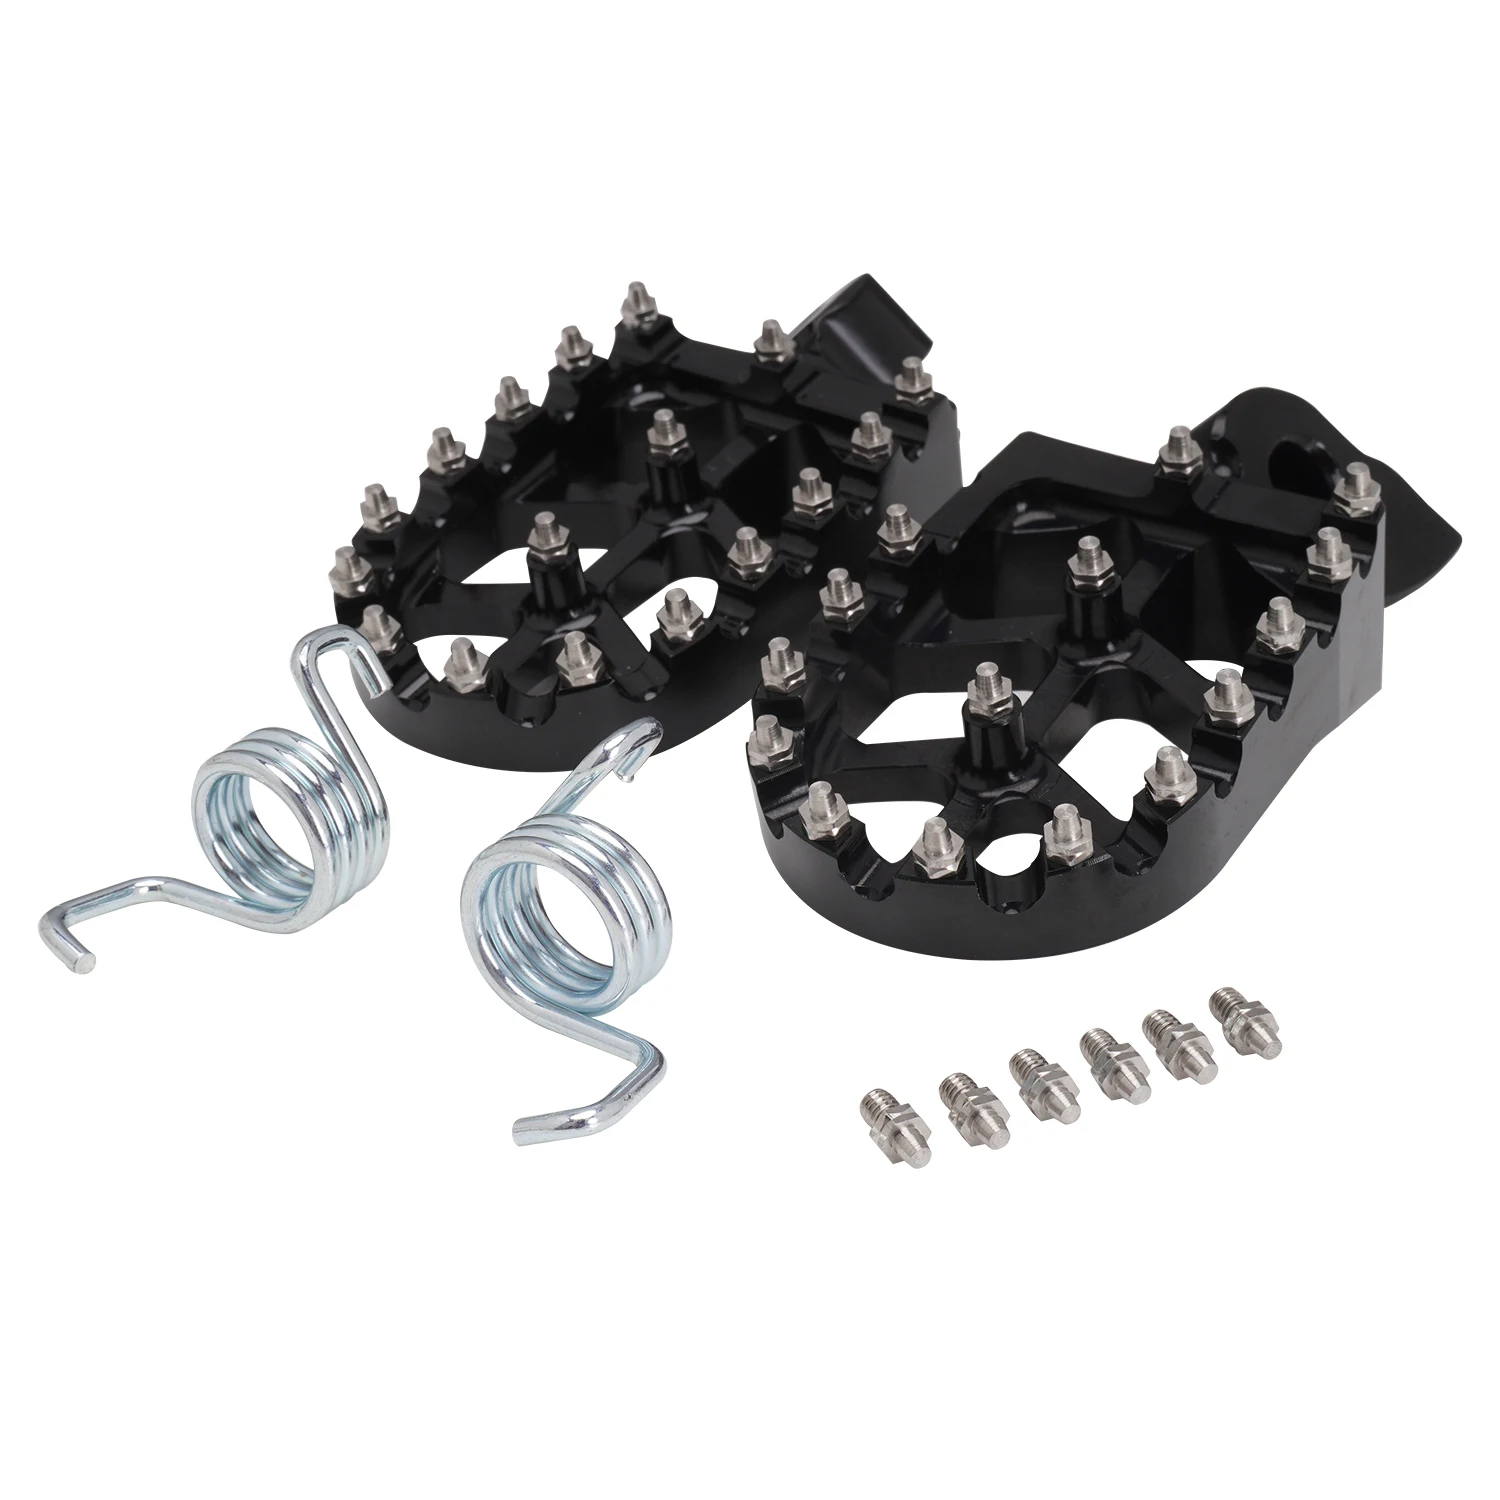 

For YAMAHA YZ 65 85 125 250 125X 250X 250FX 450FX WR 250F 450F YZF WRF 250 450 Motorcycle CNC Foot Pegs Footpeg Pedals FootRest